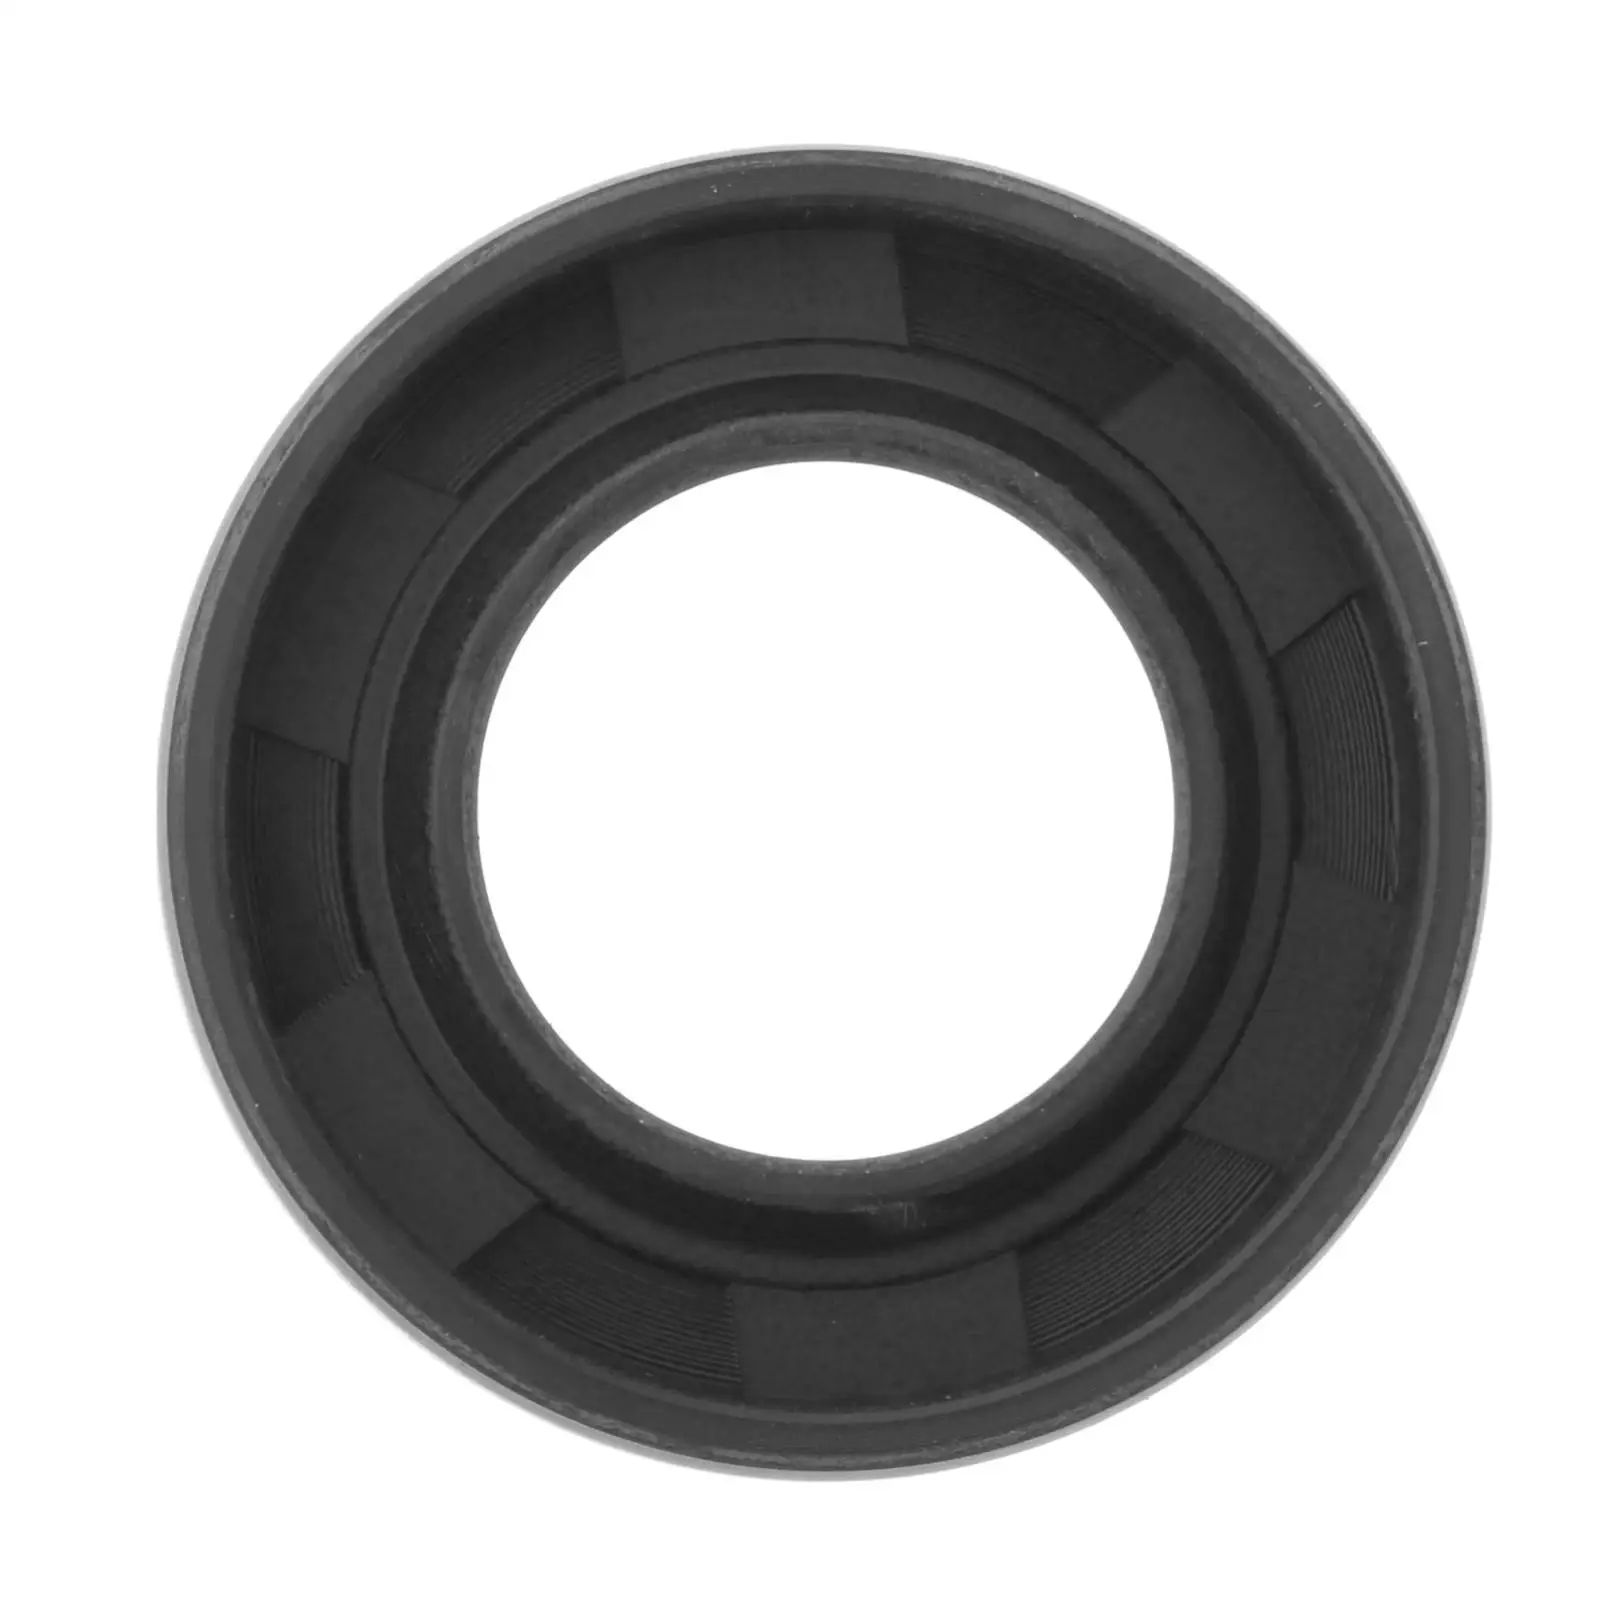 Boat Motor Oil Seal Replacement Fit for Yamaha Outboard 60HP 70HP 2T 3cyl